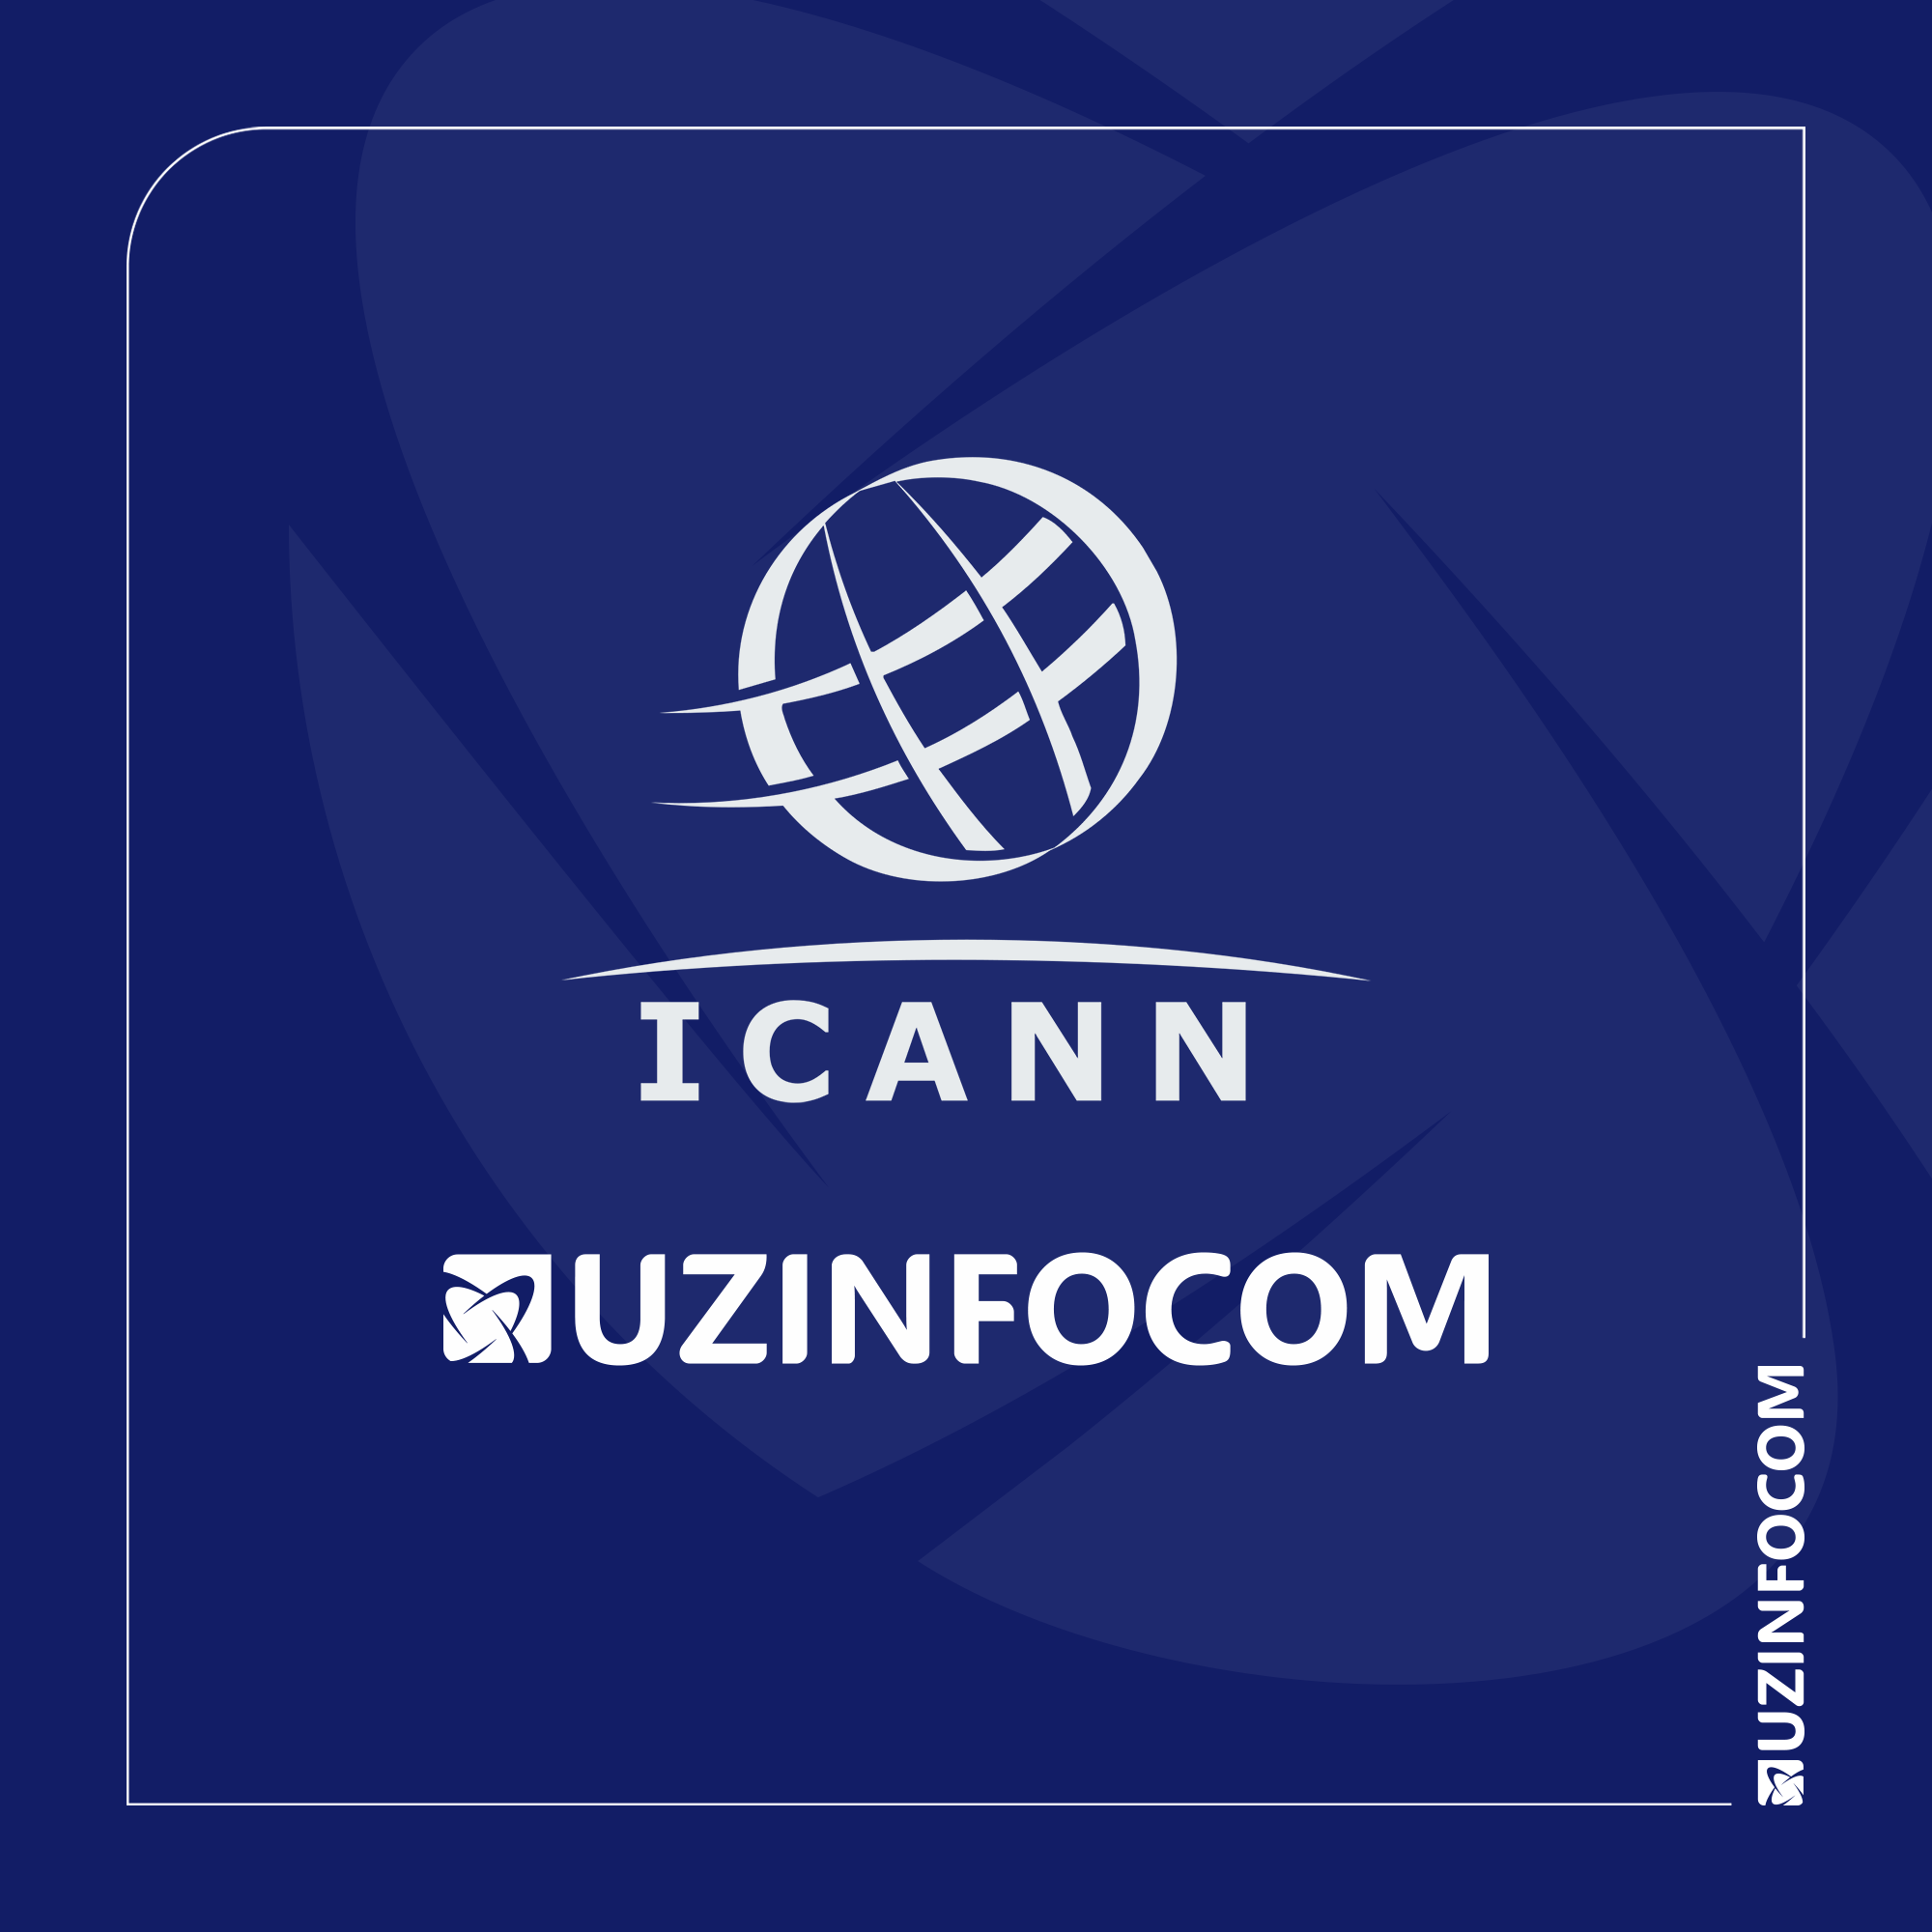 Zoom meeting with Mikhail Anisimov - a regional representative of the international organization for the assignment of Internet names and addresses ICANN